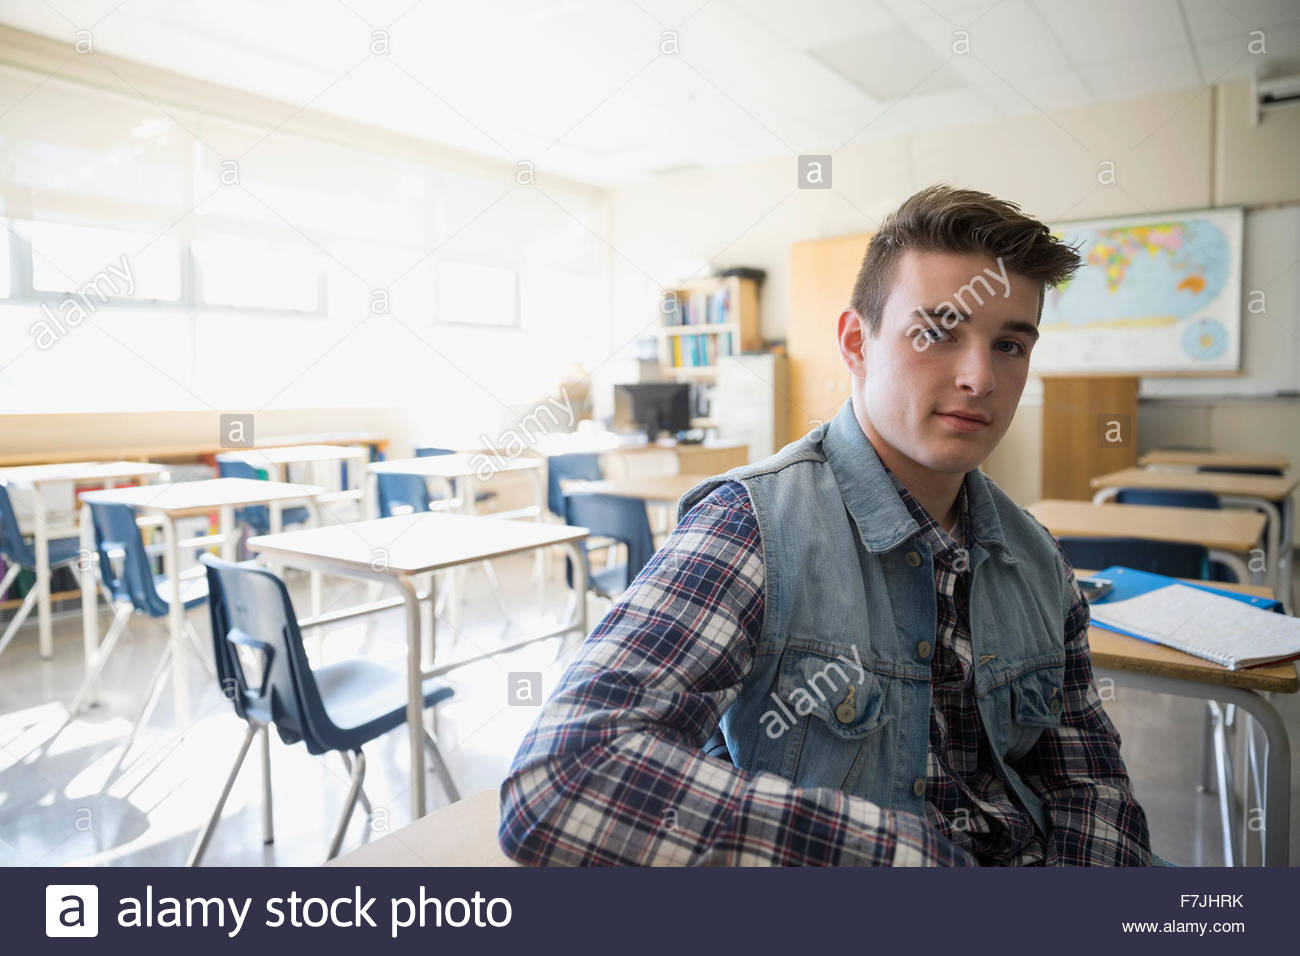 Portrait serious high school student in classroom Stock Photo